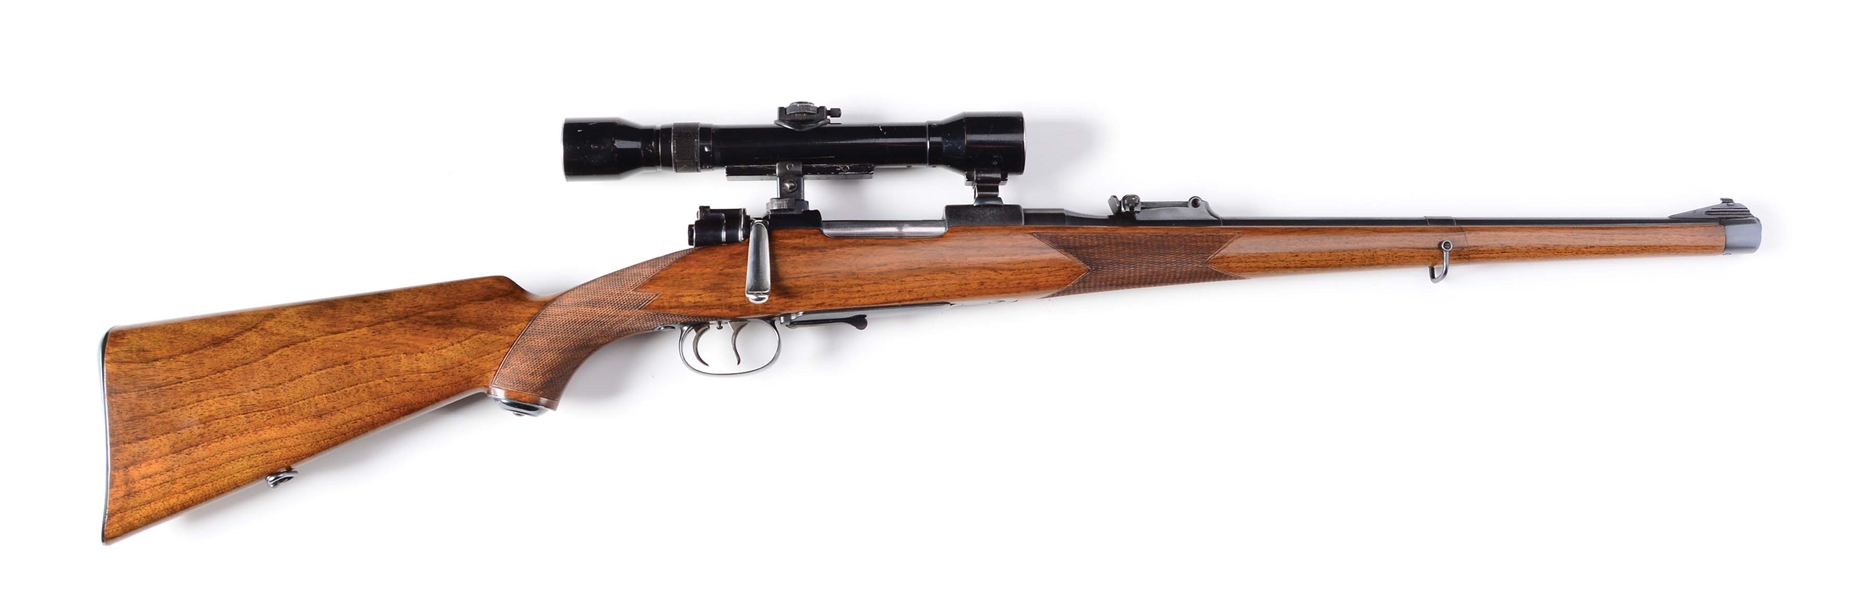 (C) NICELY RESTORED MAUSER TYPE M PATTERN 276 BOLT ACTION SPORTING CARBINE IN 7 X 57 WITH SCOPE